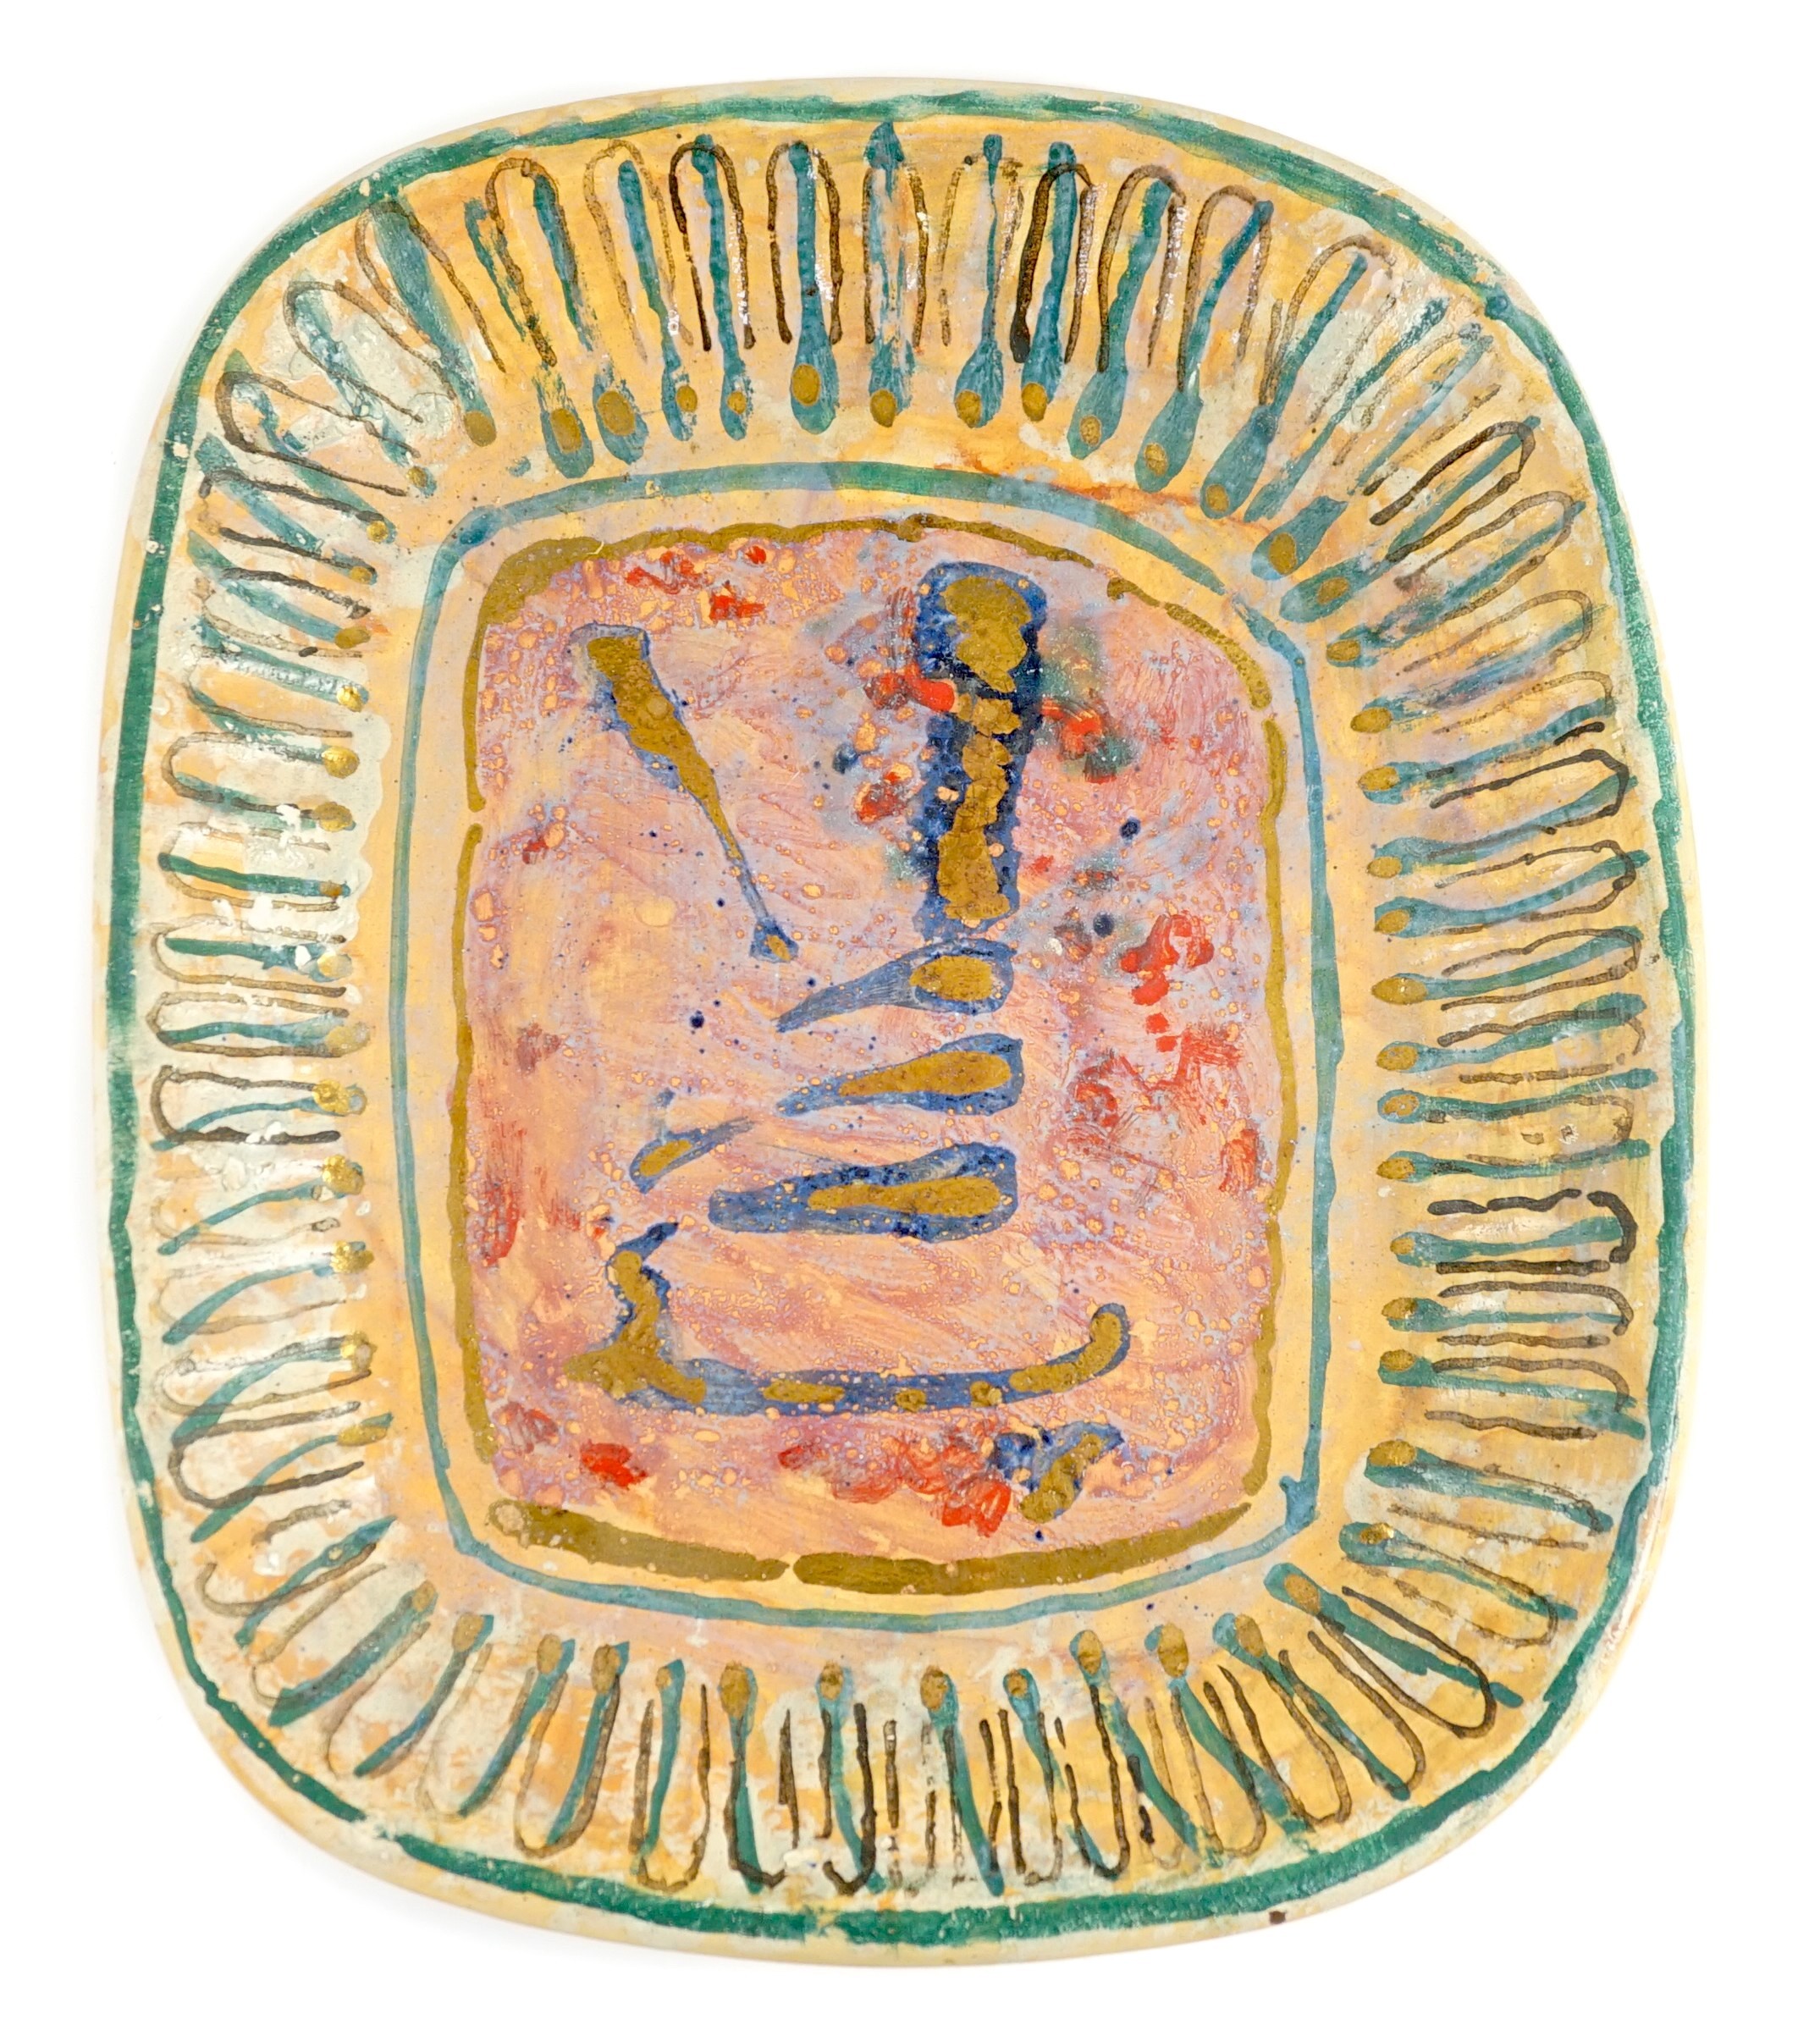 Quentin Bell (1910-1996) for Fulham pottery. An earthenware dish, 34.5cm wide